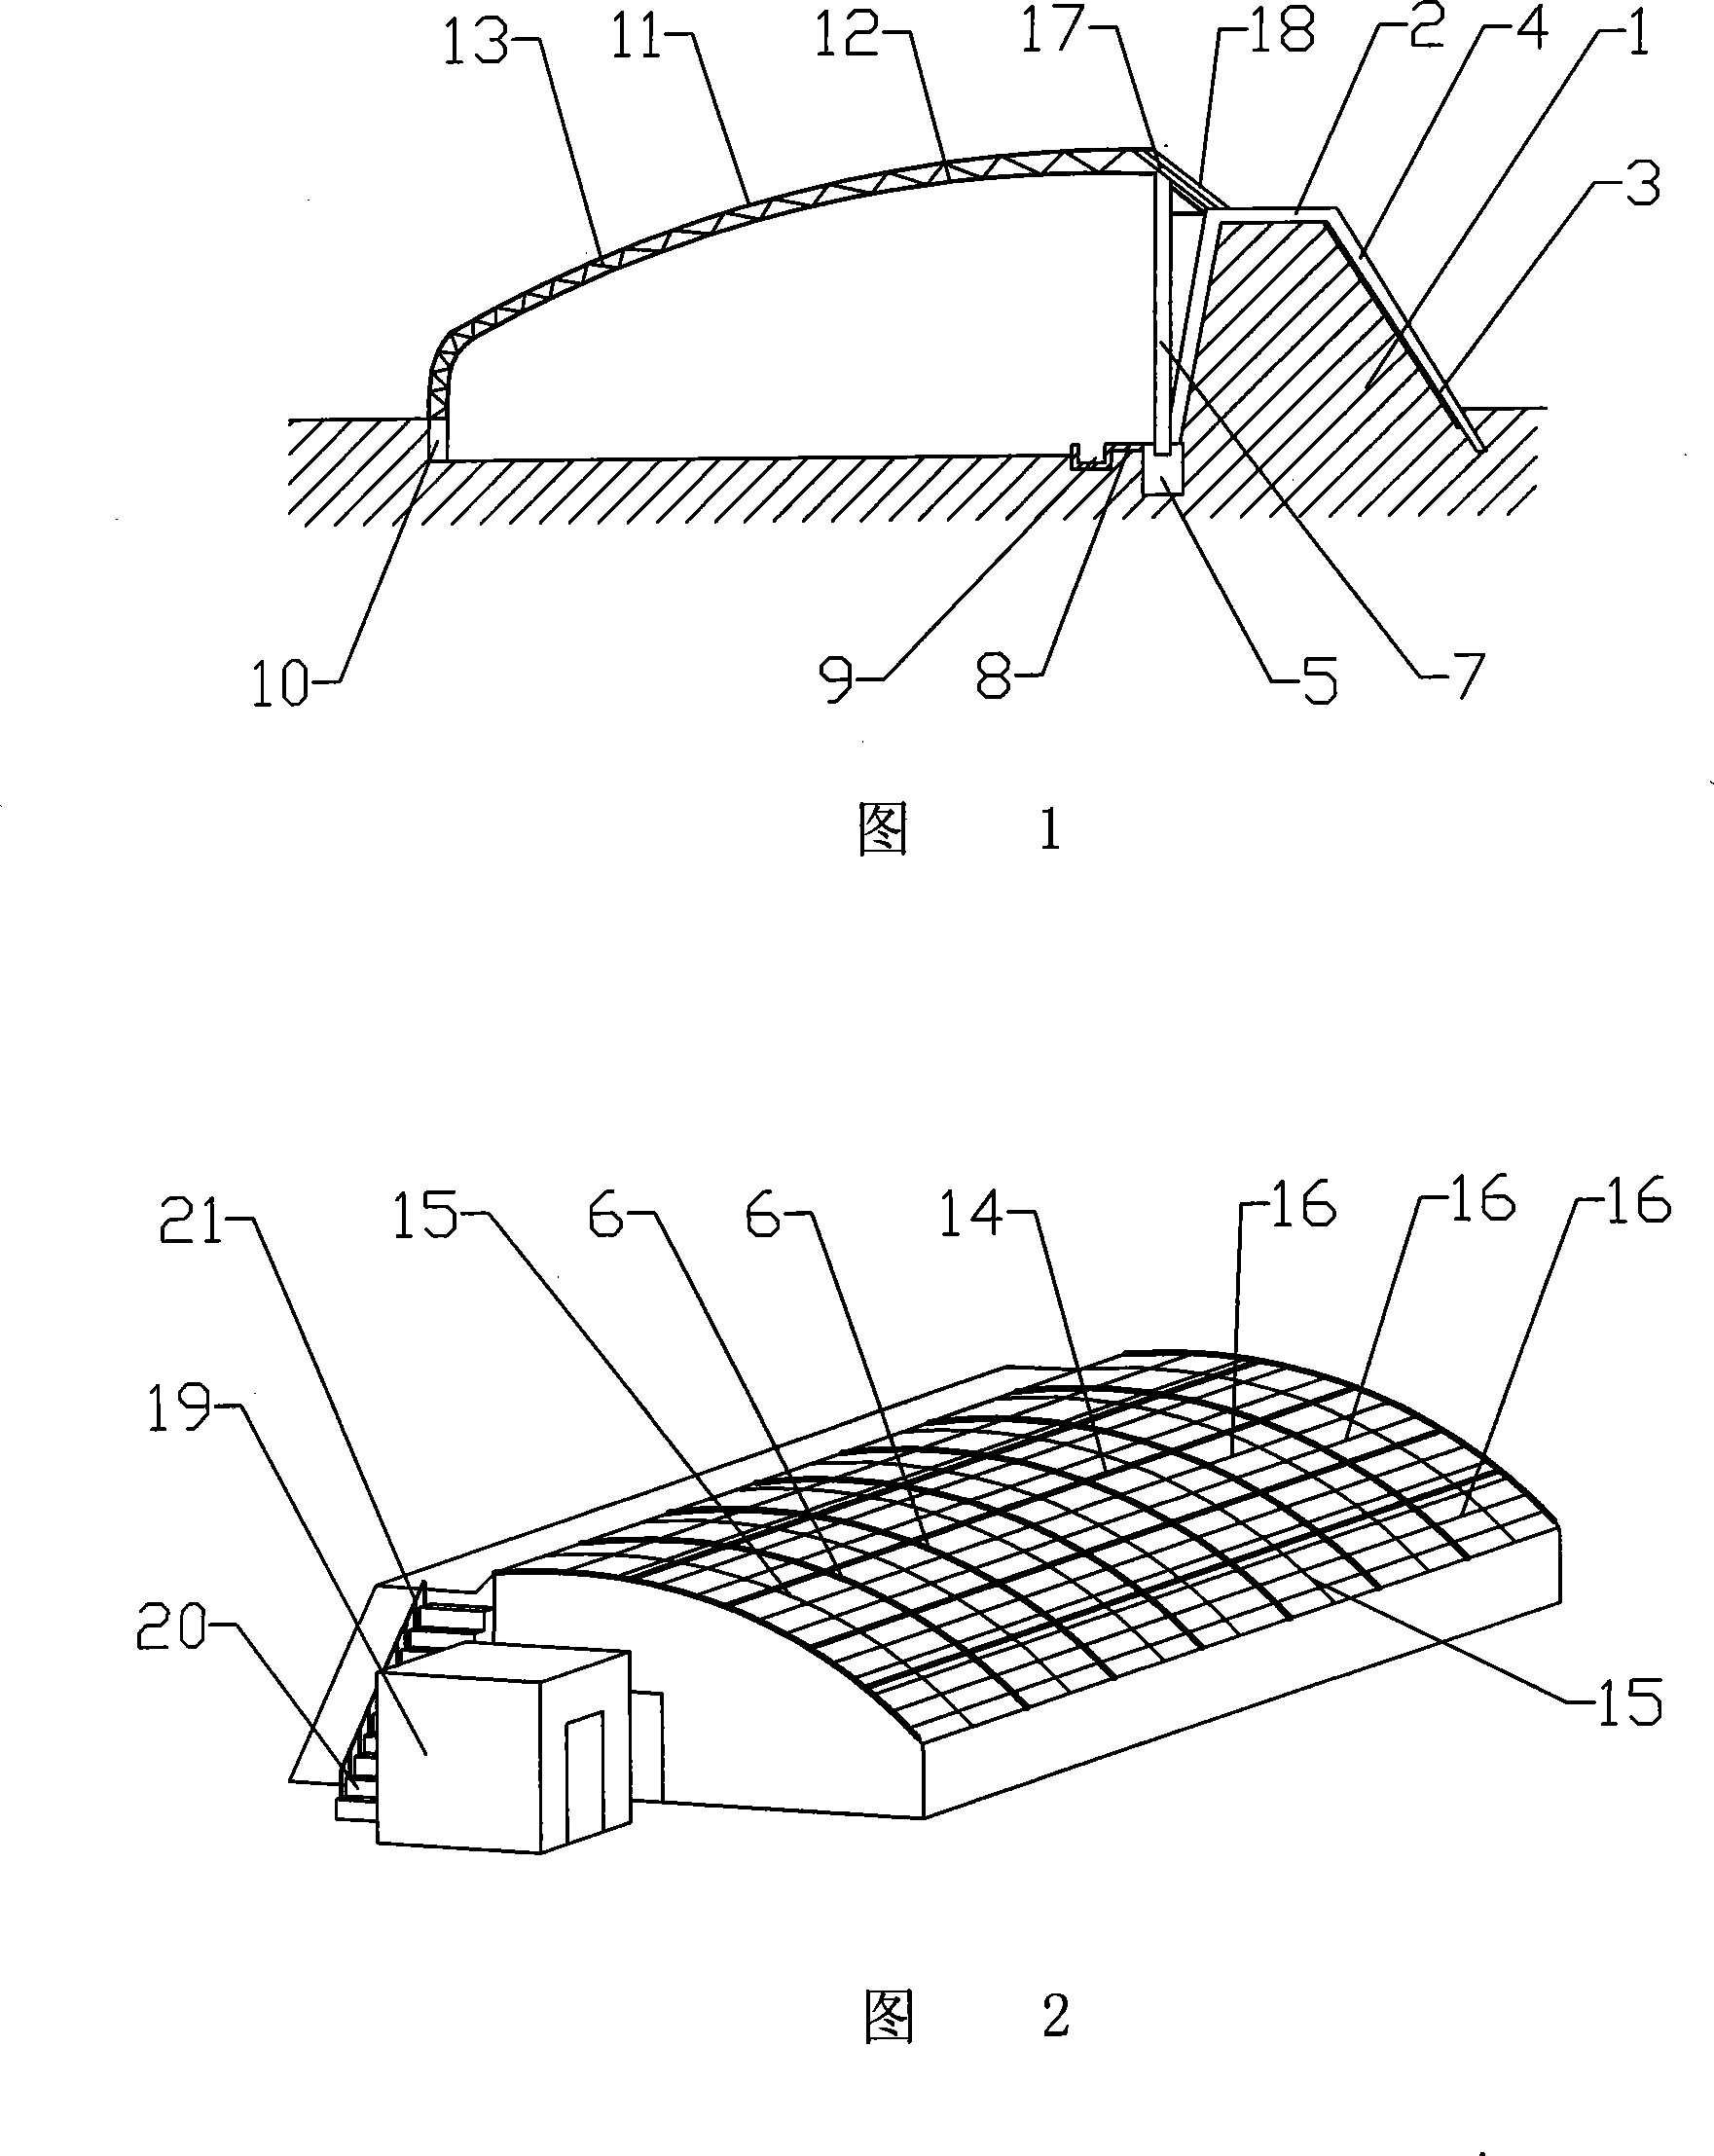 Construction method of daylighting hyperthermia booth